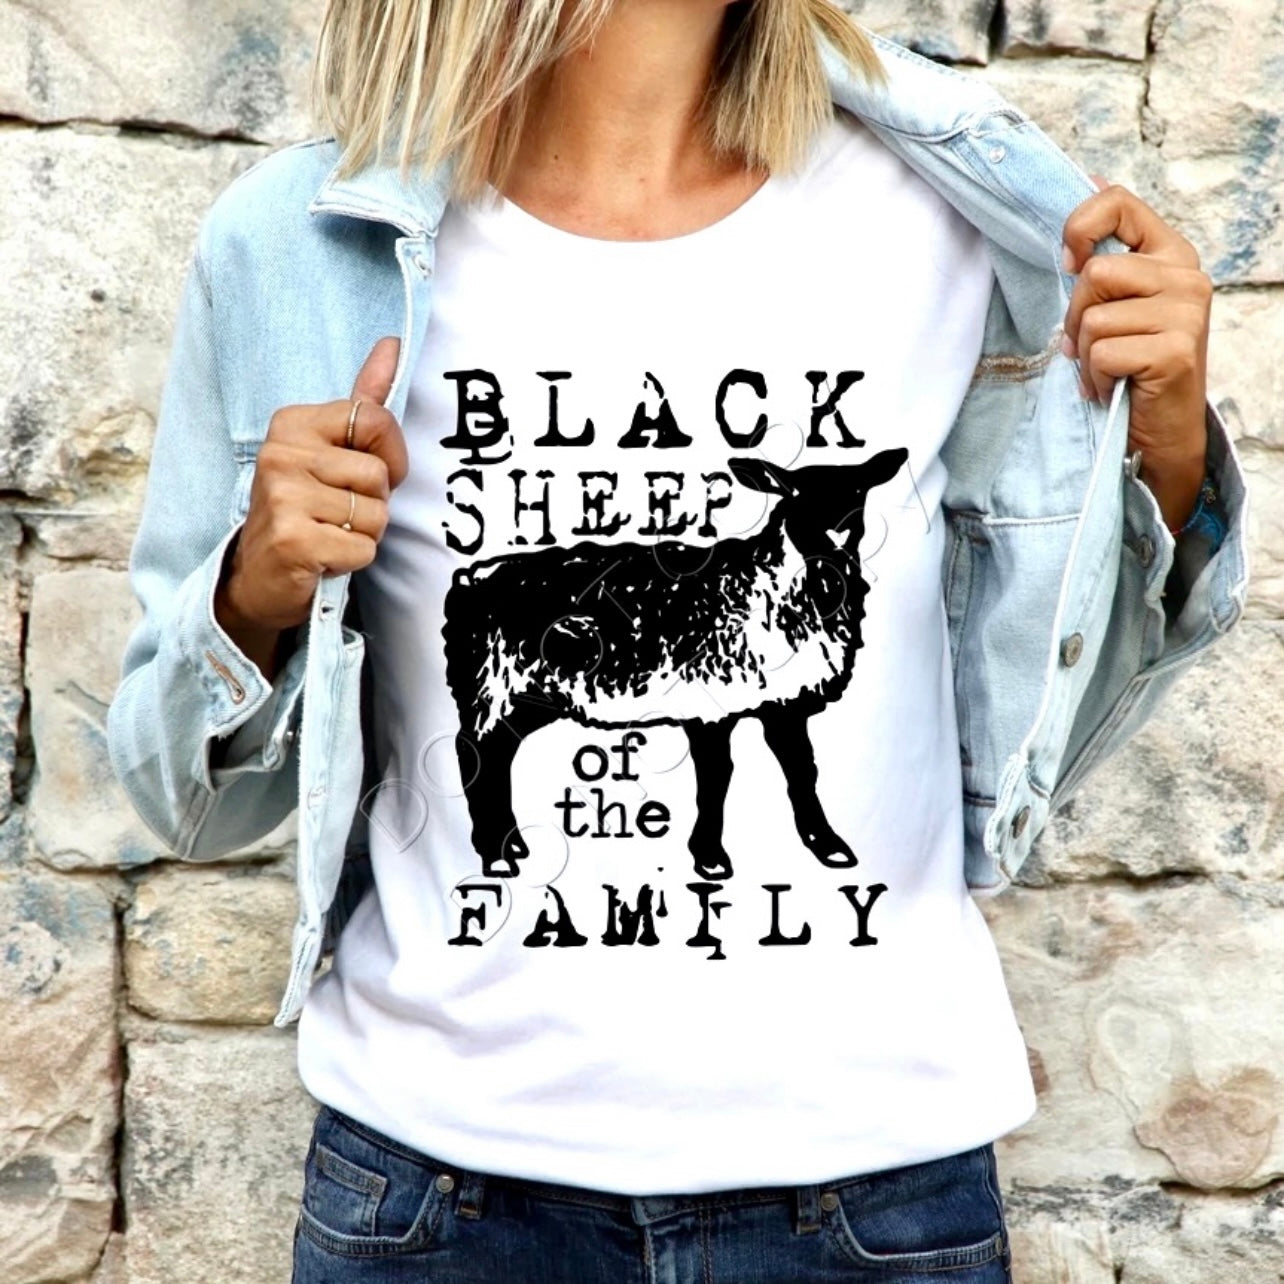 Black Sheep of the Family Graphic Tee or Sweatshirt - Bella Lia Boutique